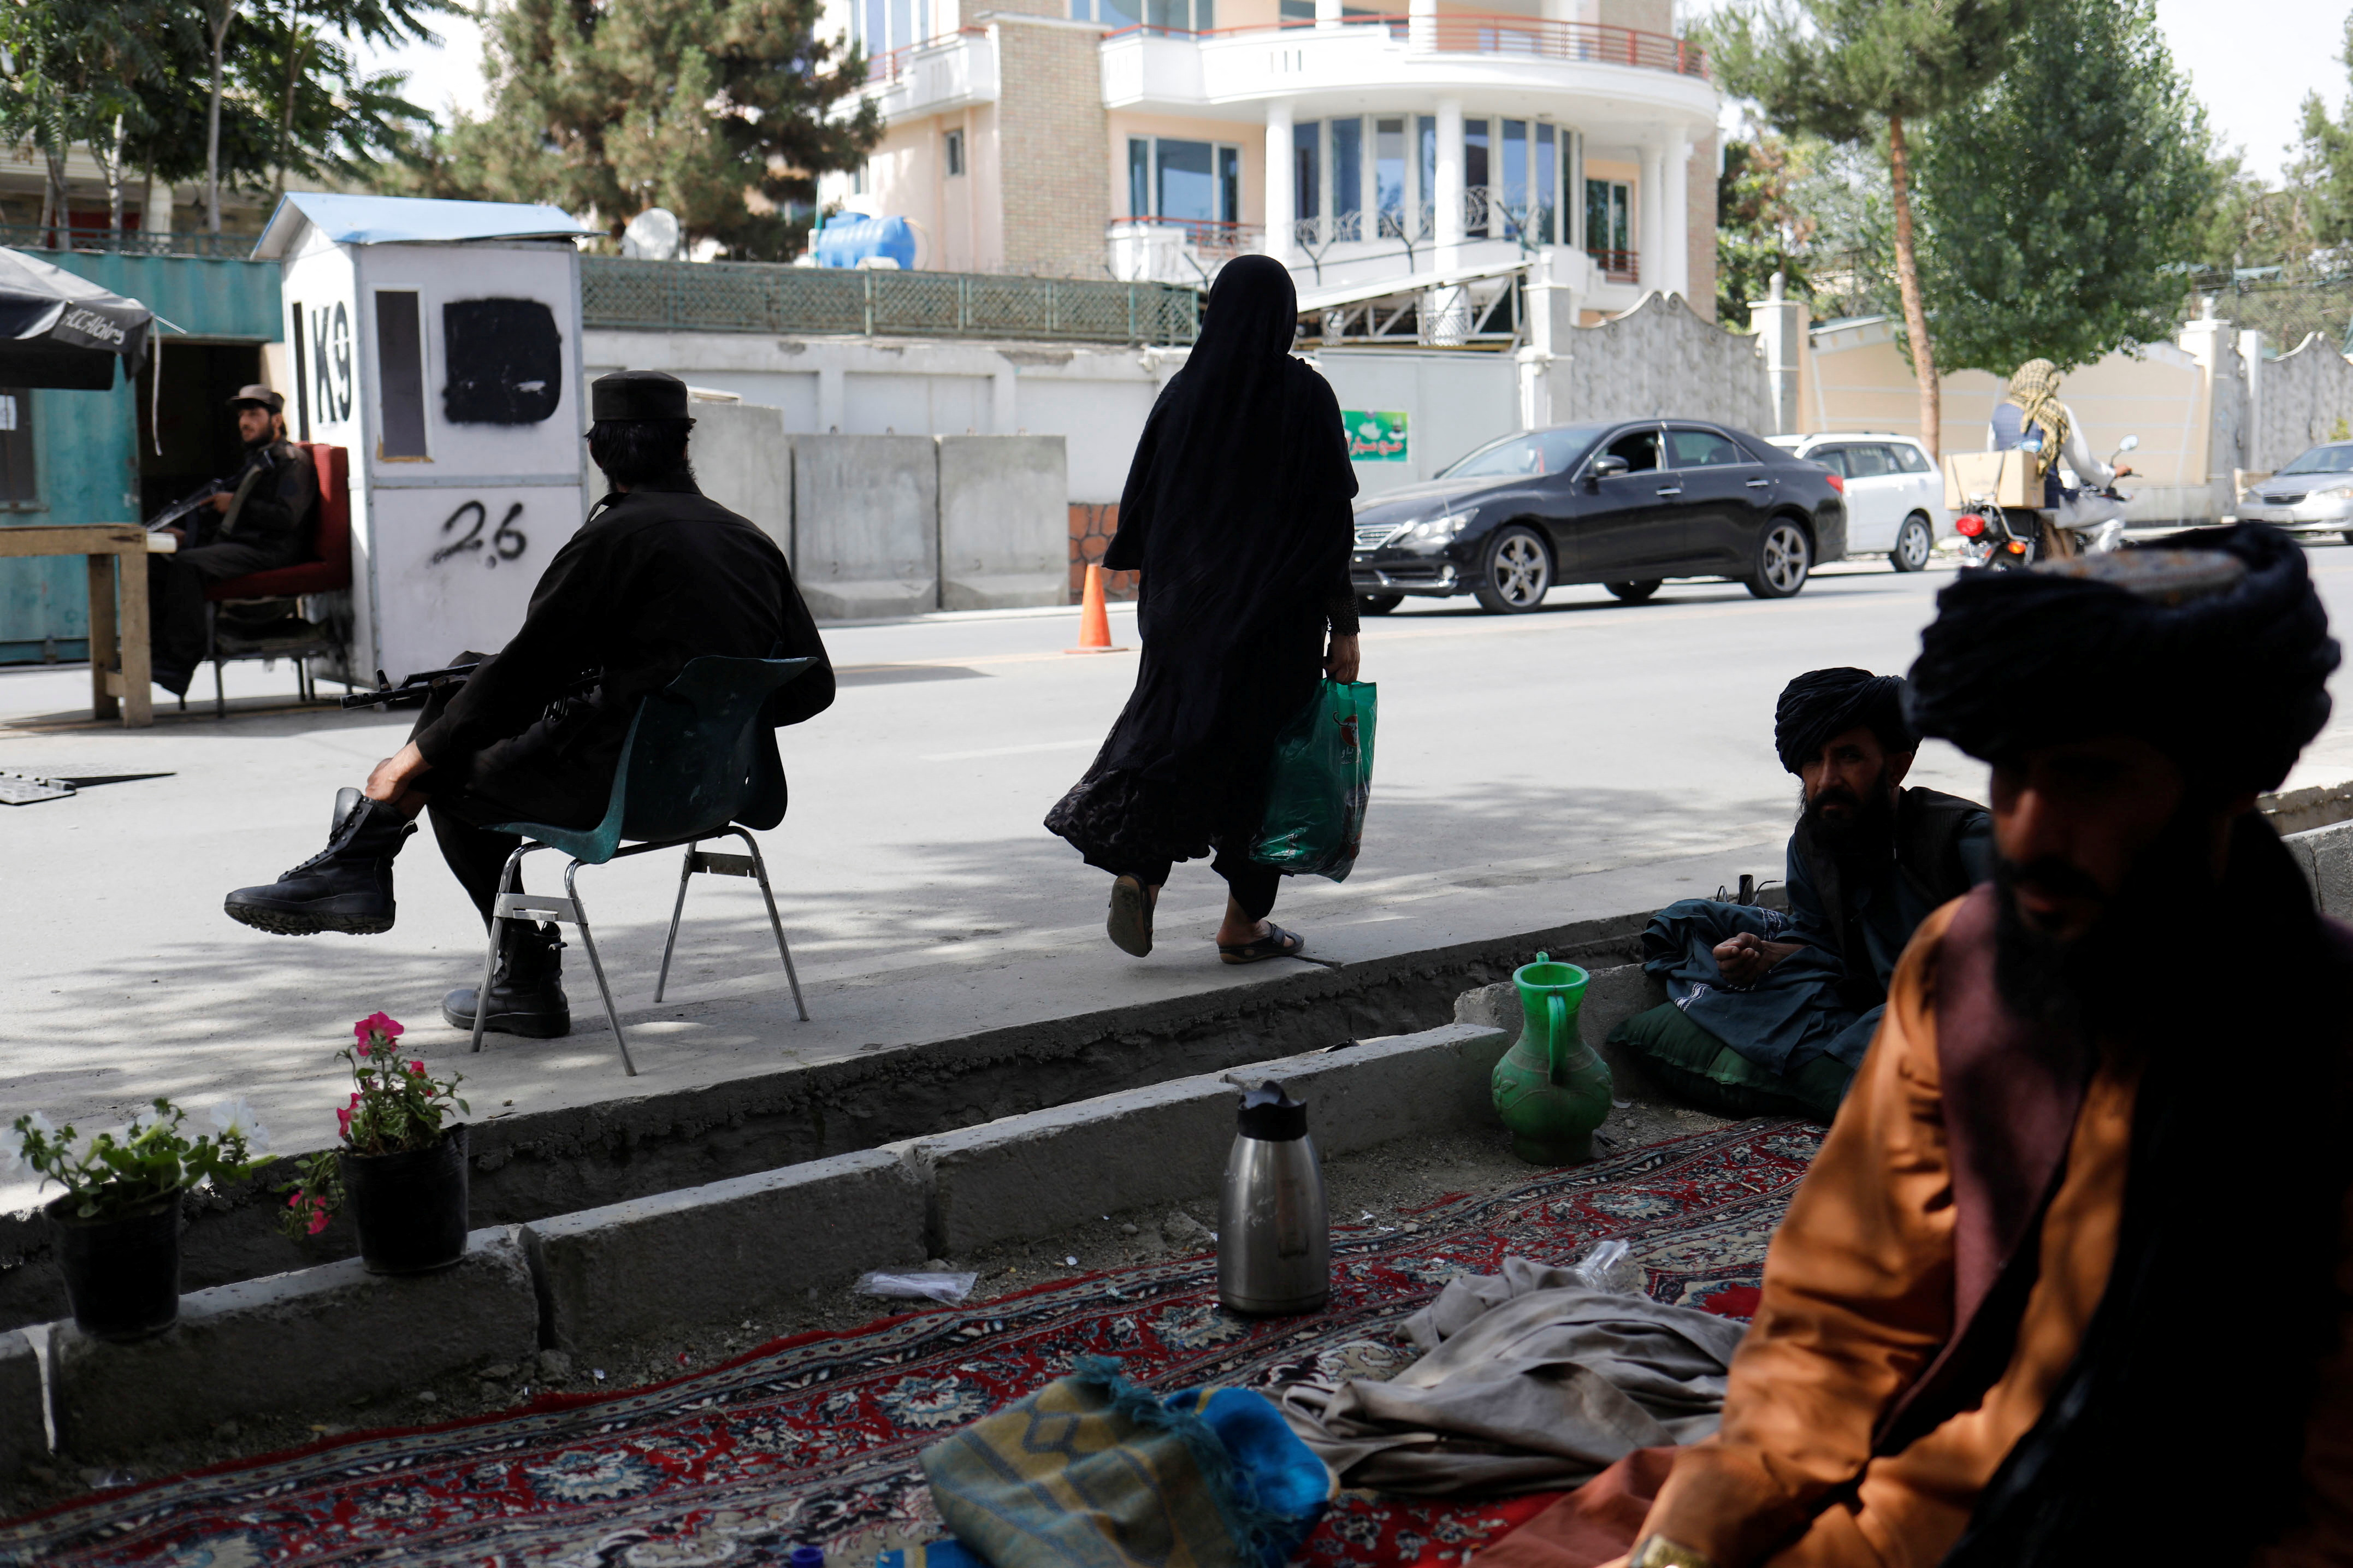 An Afghan woman walks among Taliban soldiers at a checkpoint in Kabul